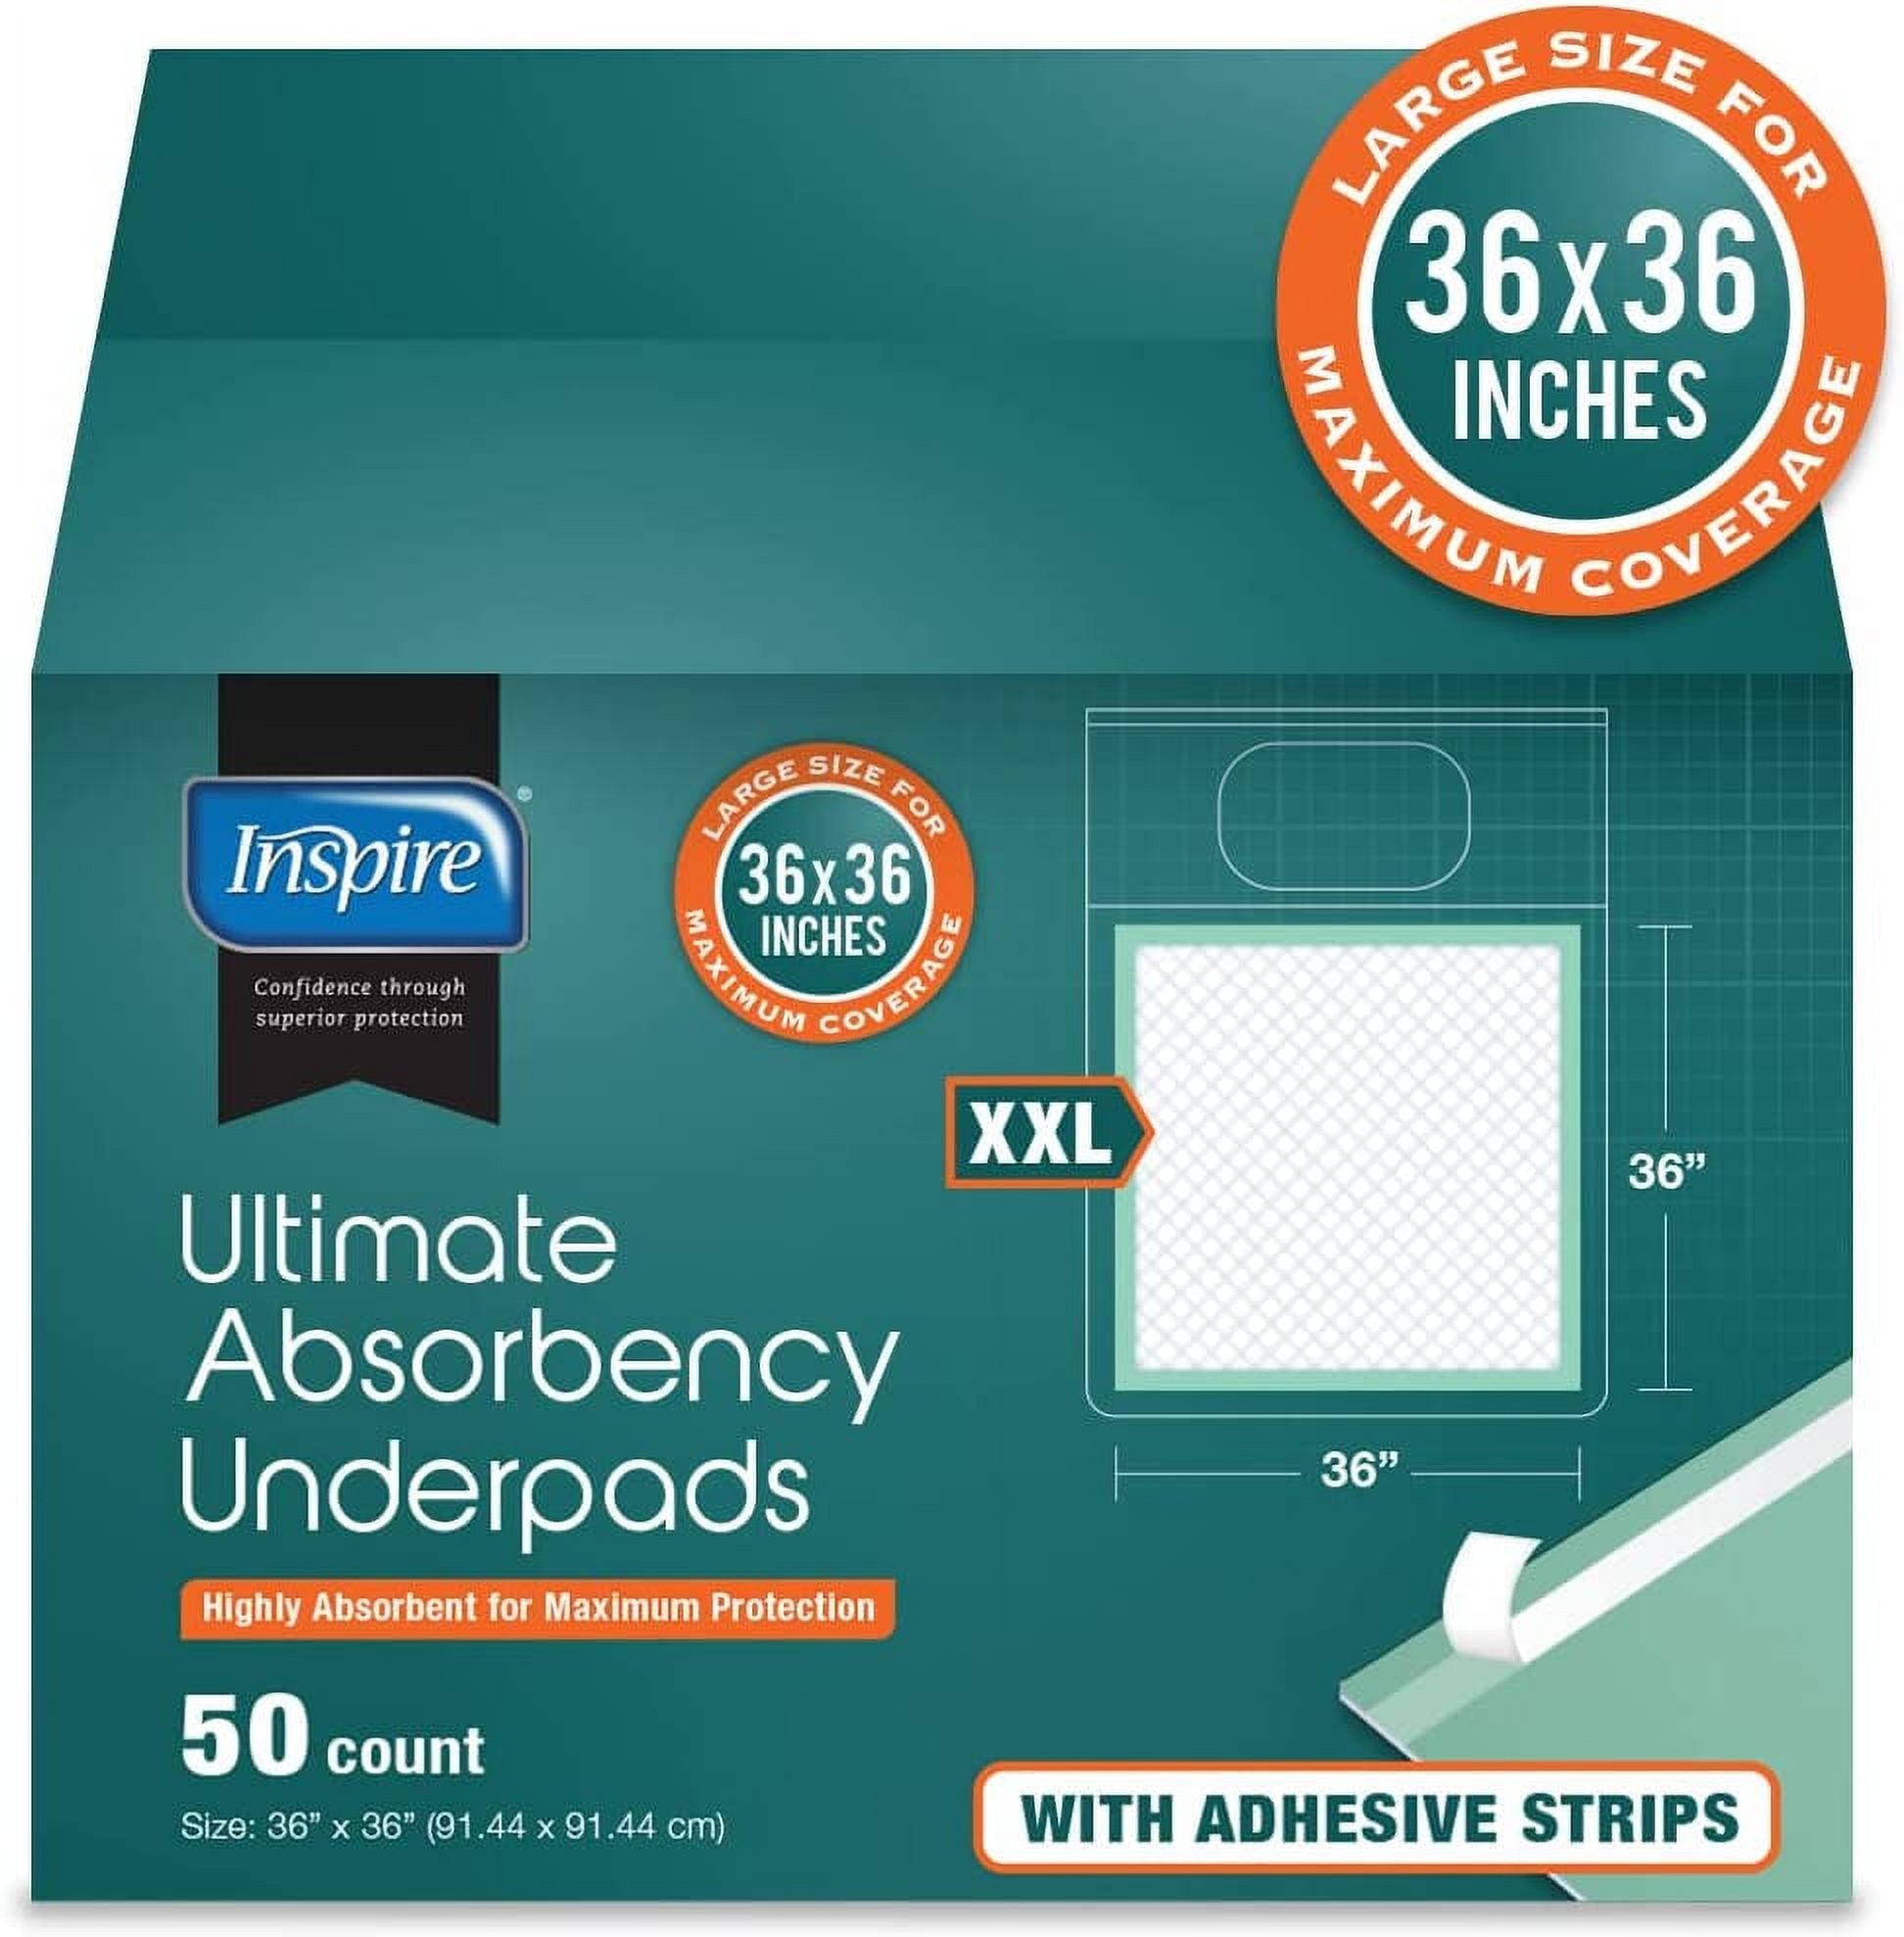 Bed Pads for Incontinence Disposable 30 x 36 [50-Count] Ultra